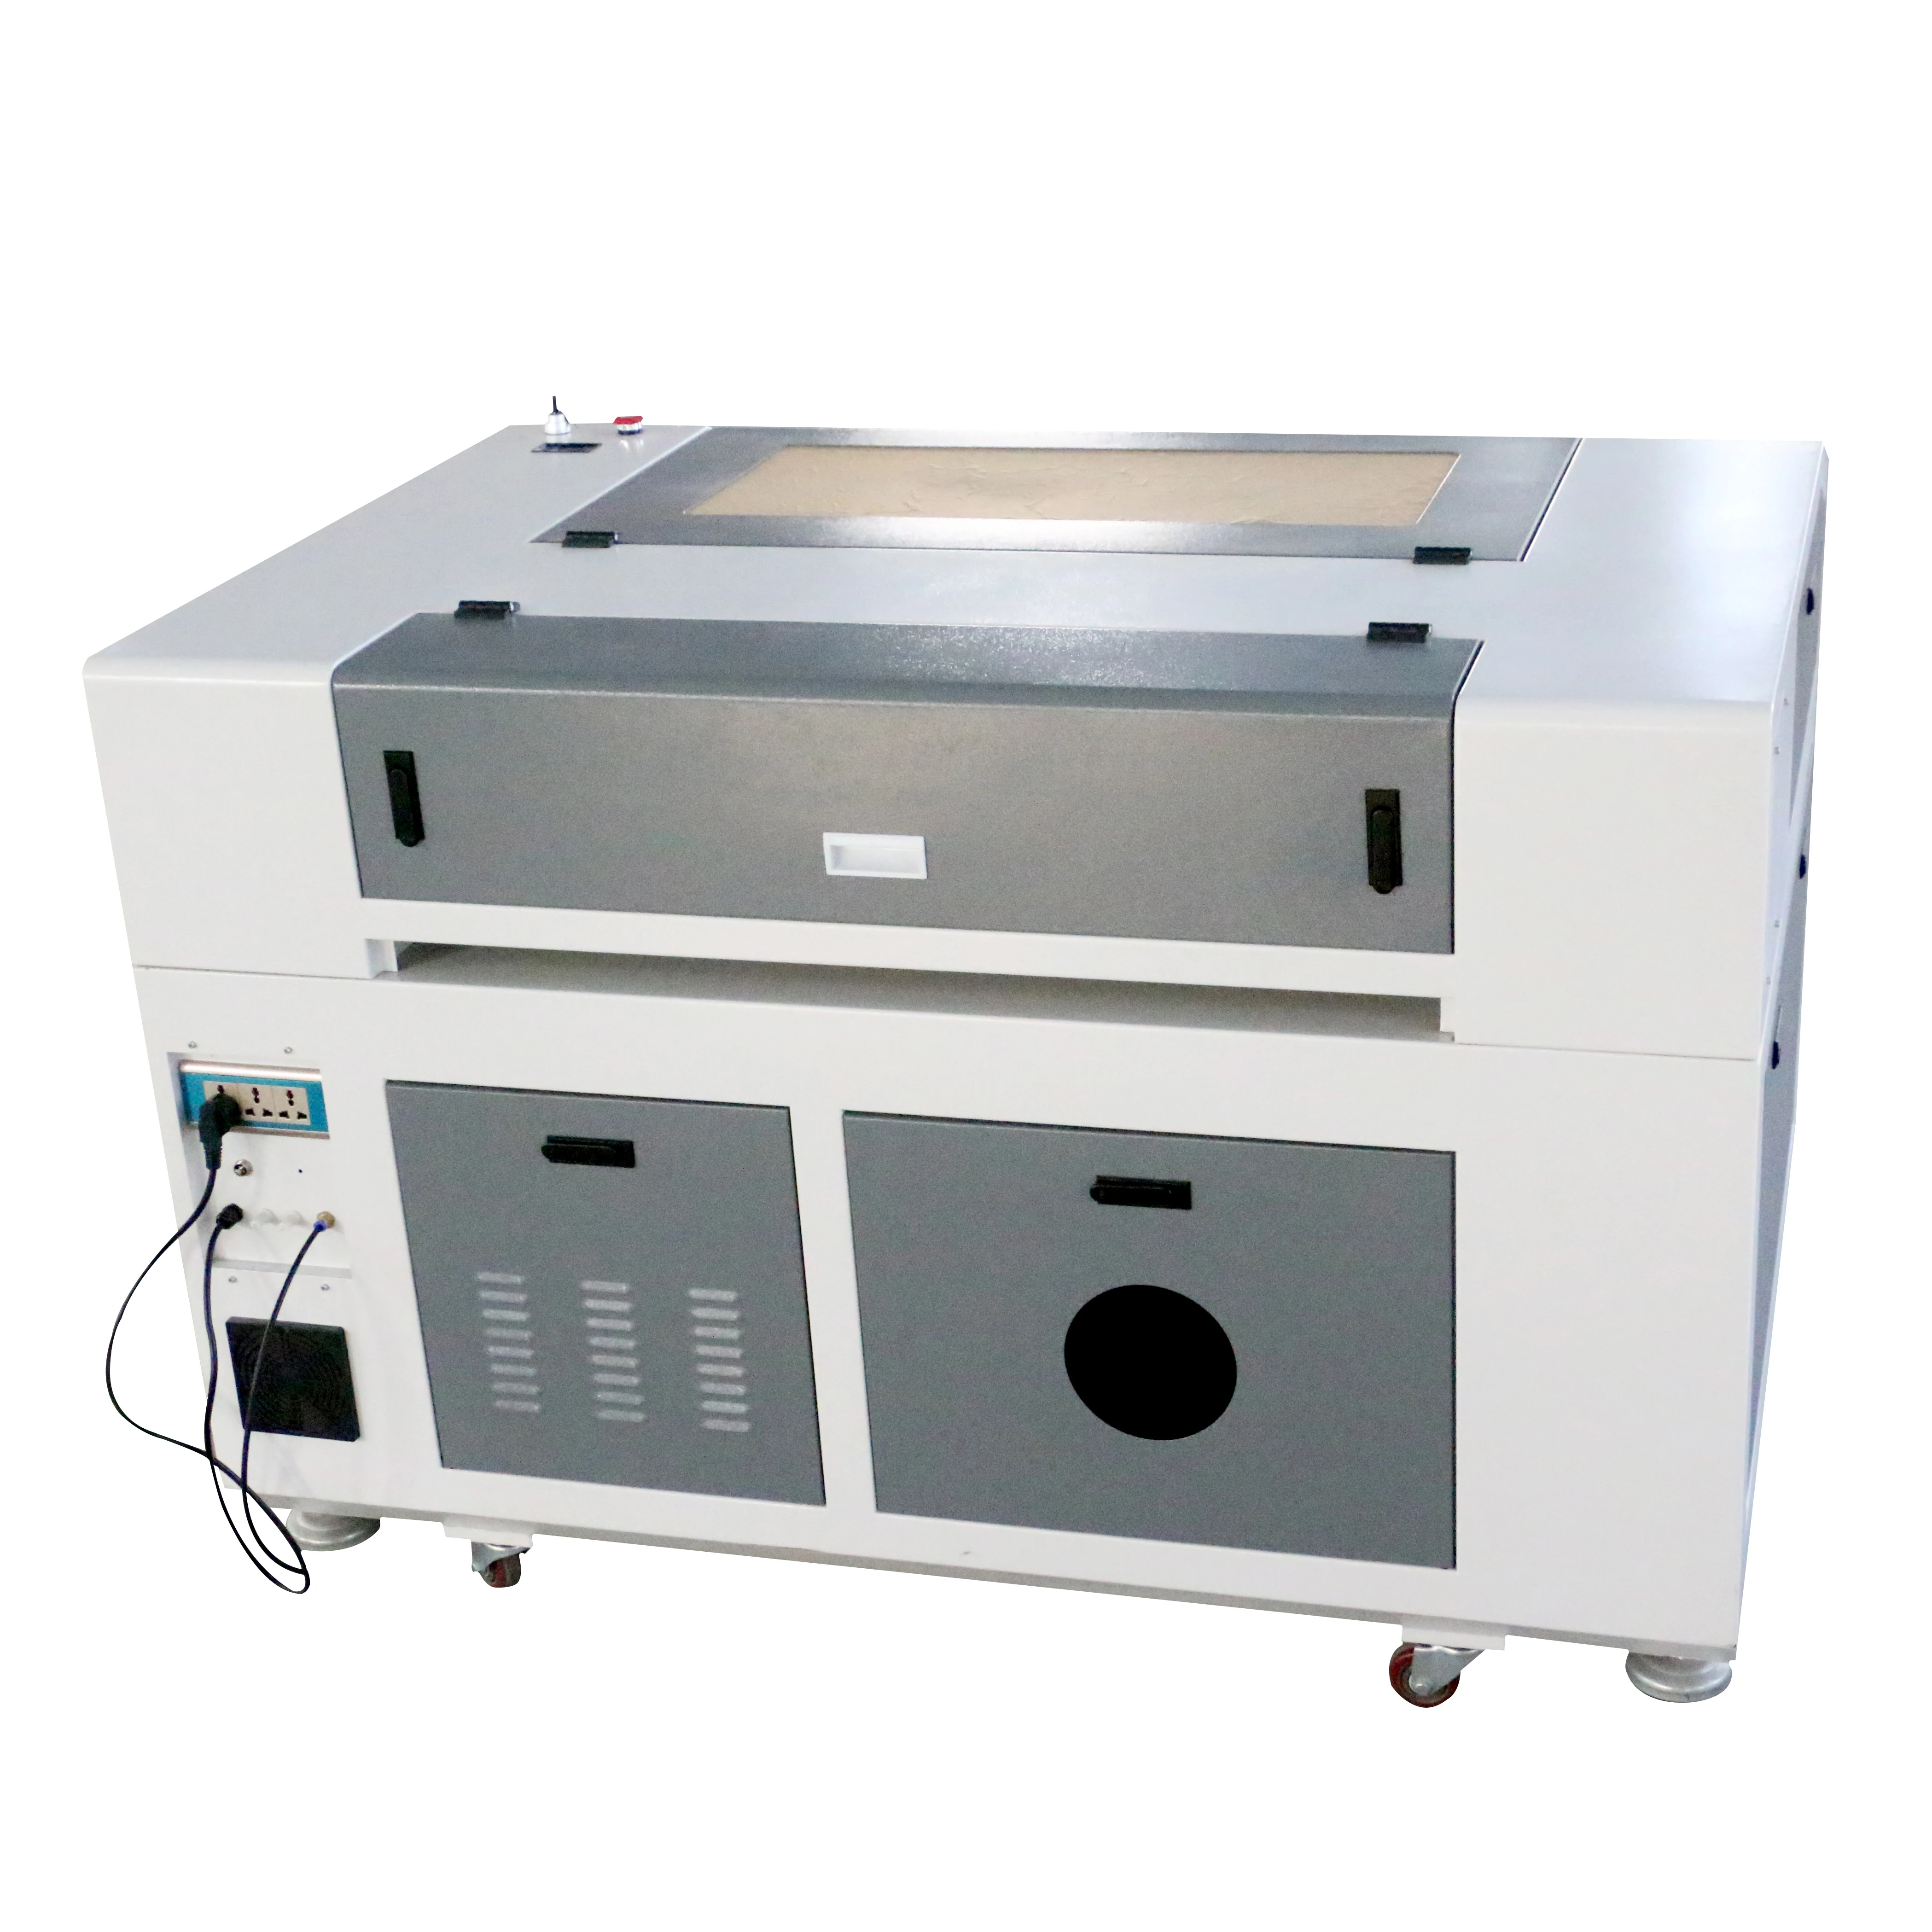 Laser engraving machine with rotating axis Co2 laser engraving machine manufacturers to promote